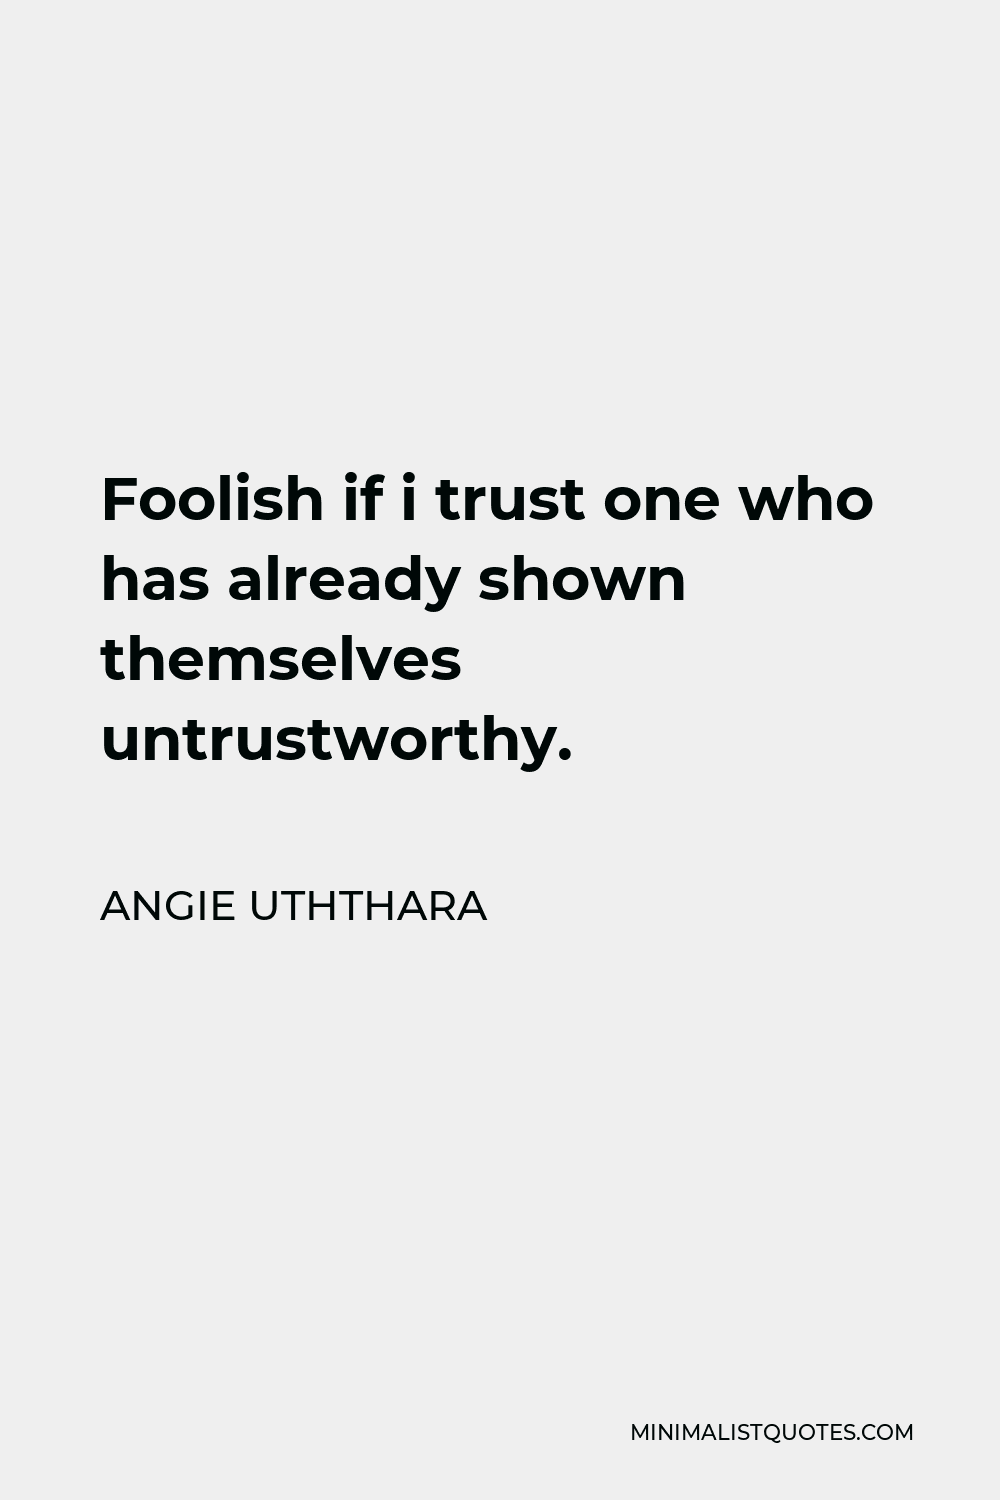 Angie Uththara Quote - Foolish if i trust one who has already shown themselves untrustworthy.